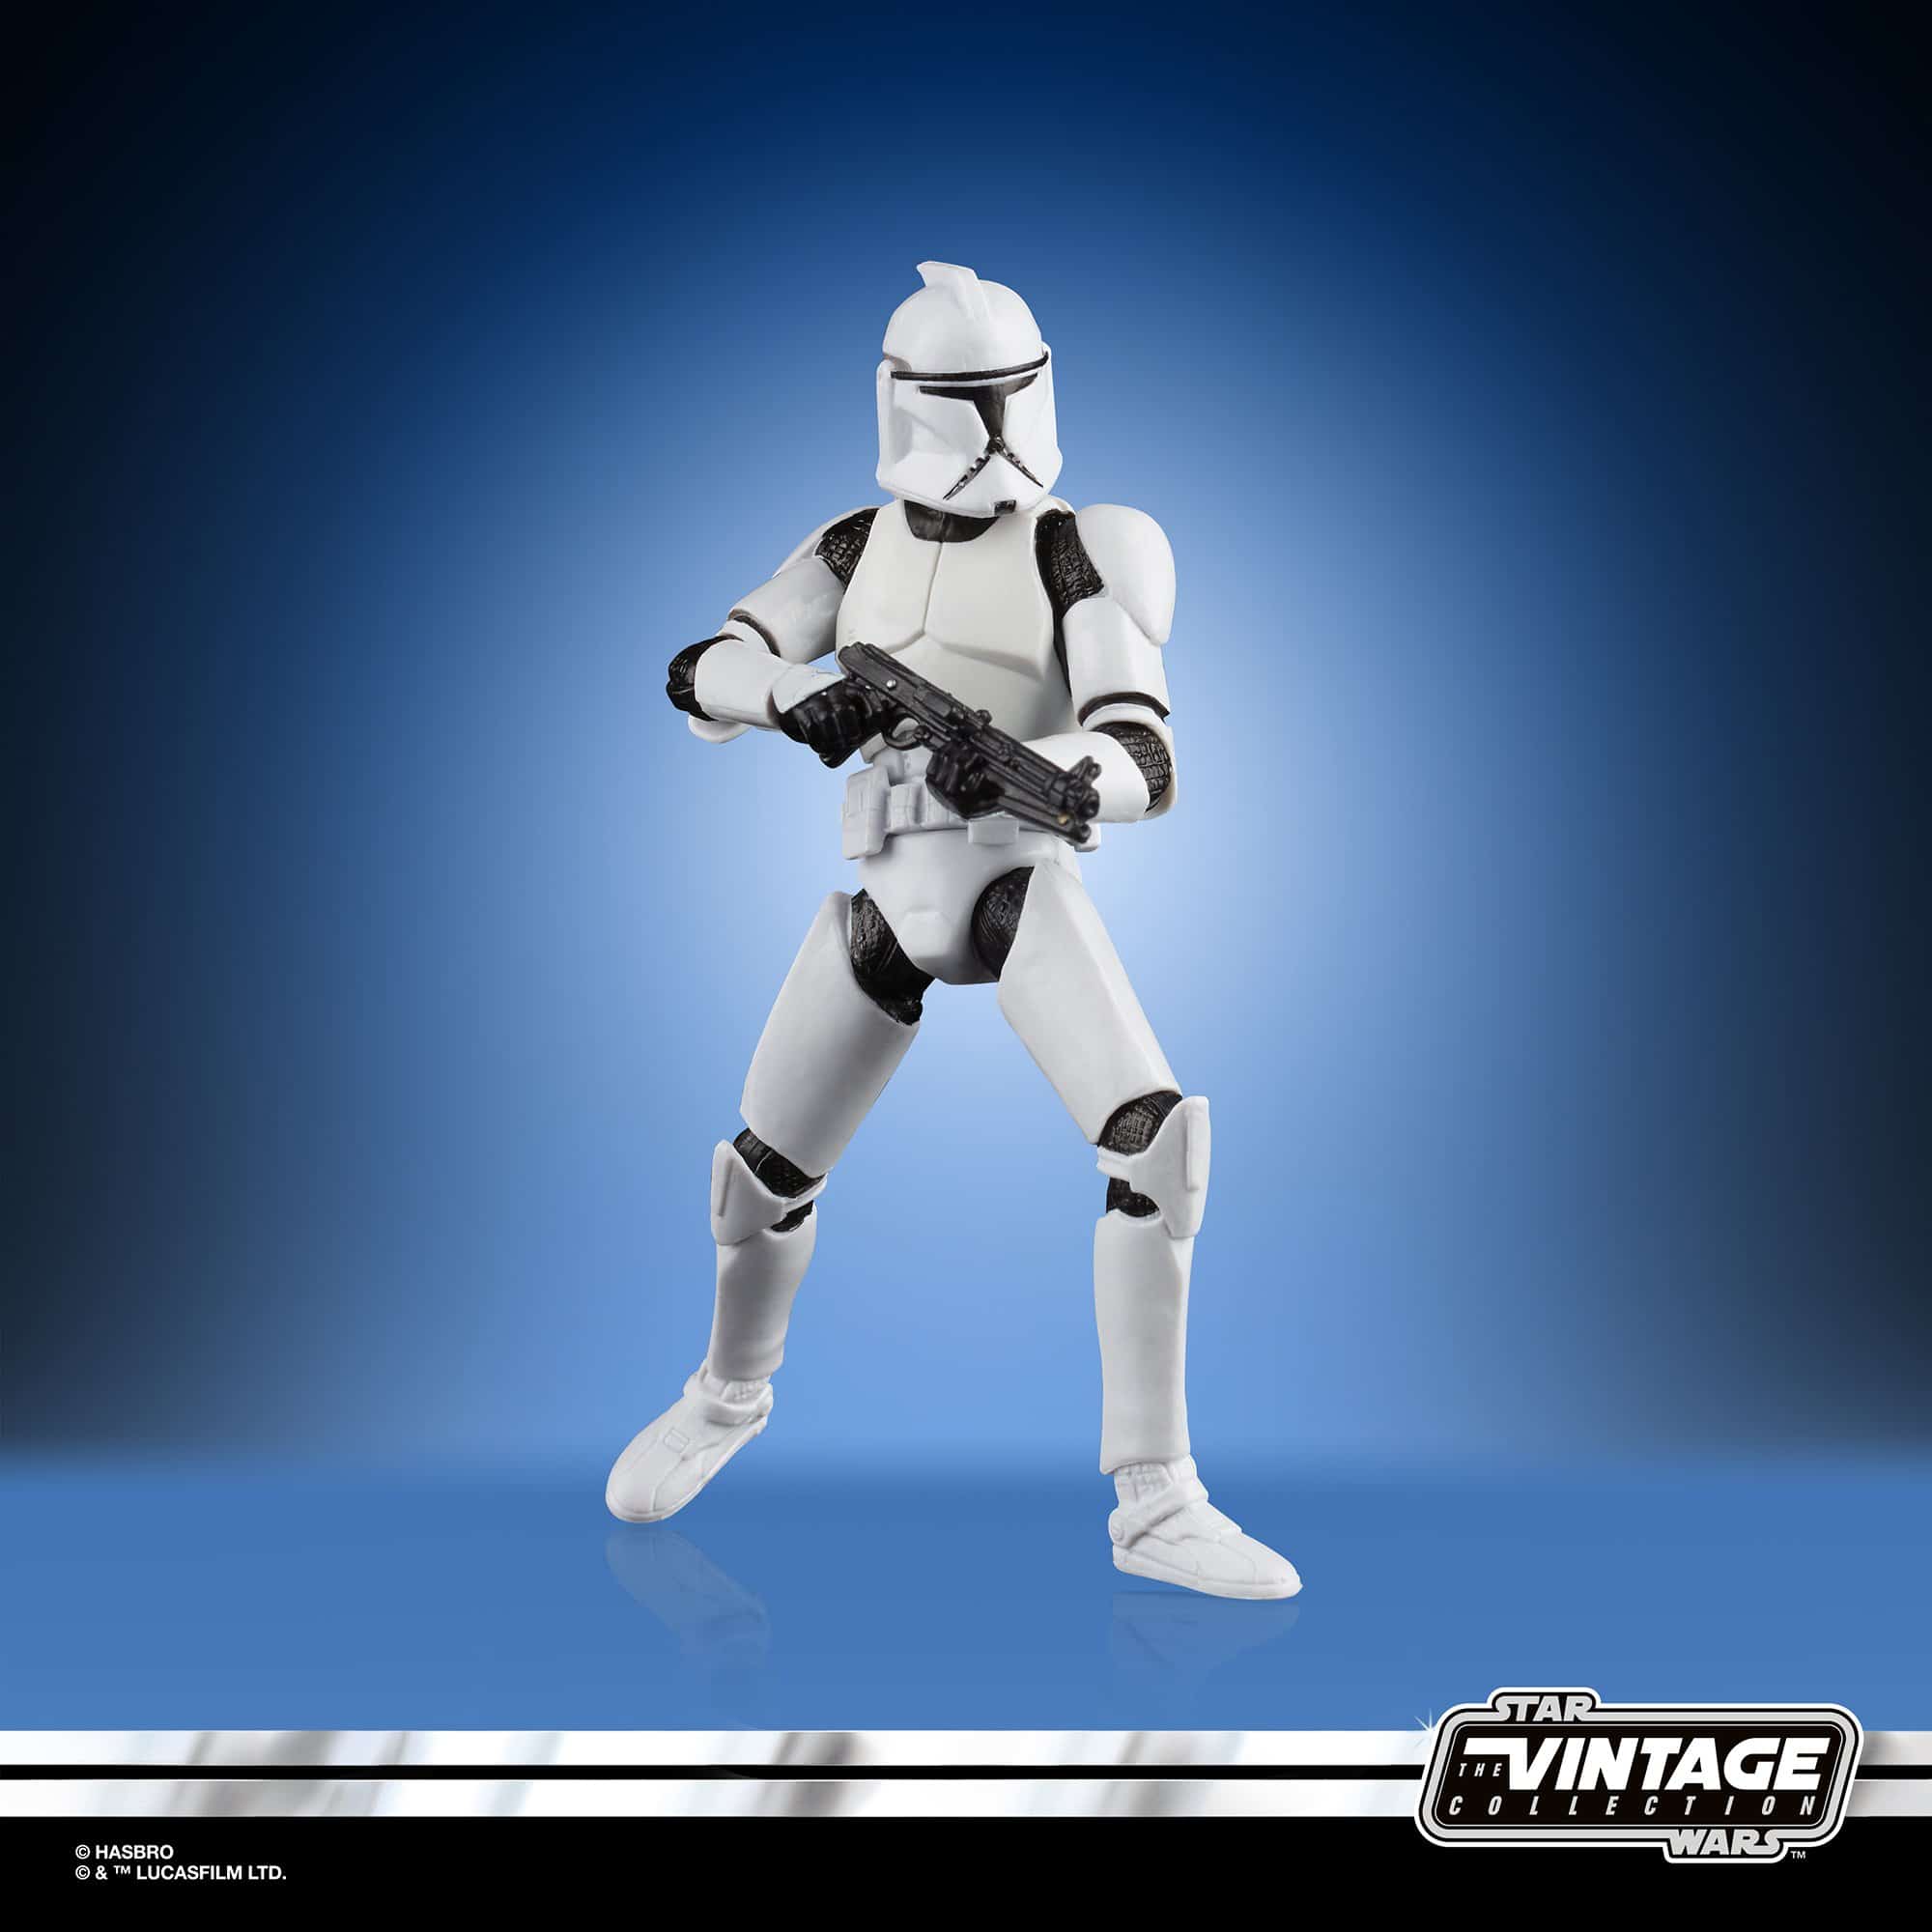 Clone Trooper Action Figure for sale online Star Wars Attack of the Clones Hasbro The Vintage Collection